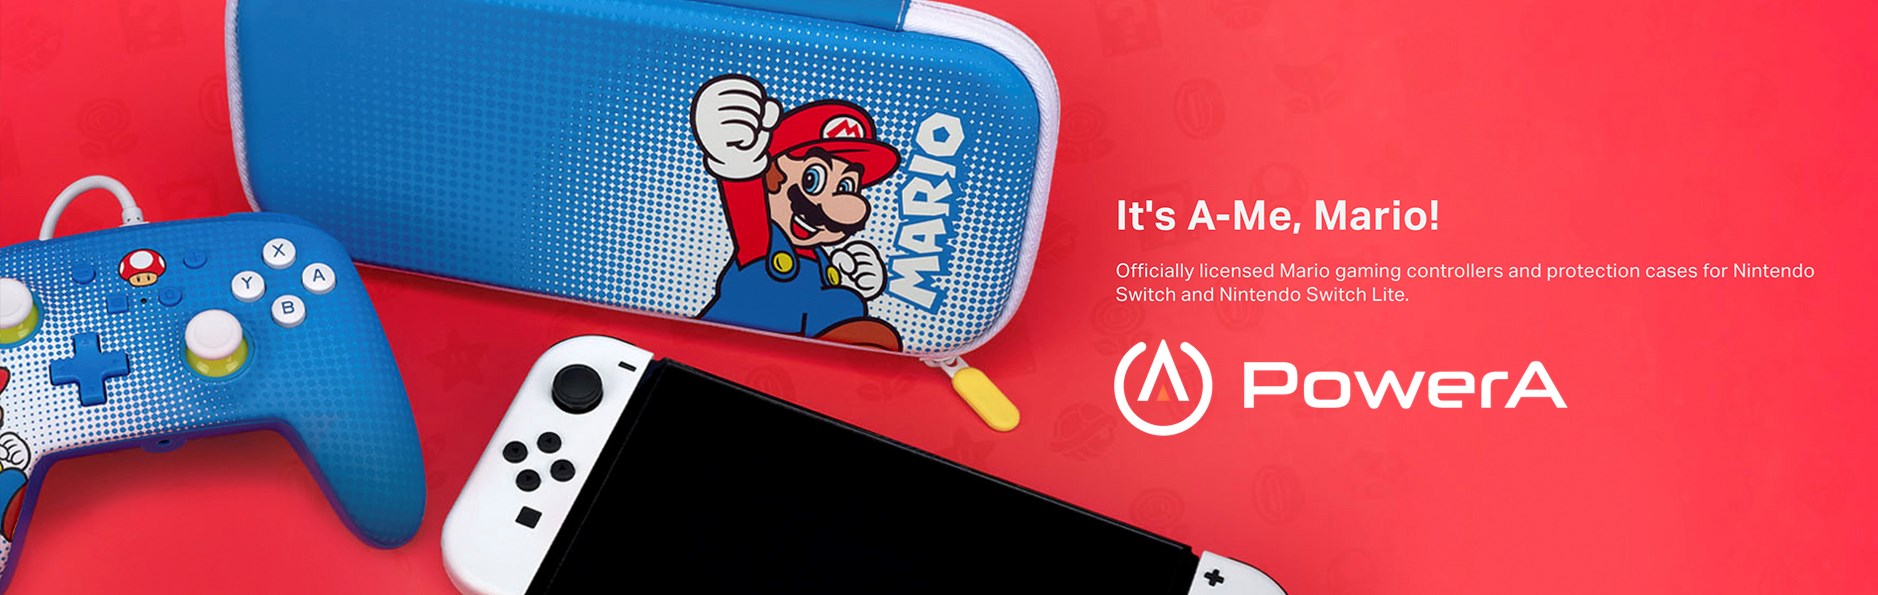 It's A-Me Mario! Officially licensed Mario gaming controllers and protection cases for Nintendo Switch and Nintendo Switch Lite by PowerA